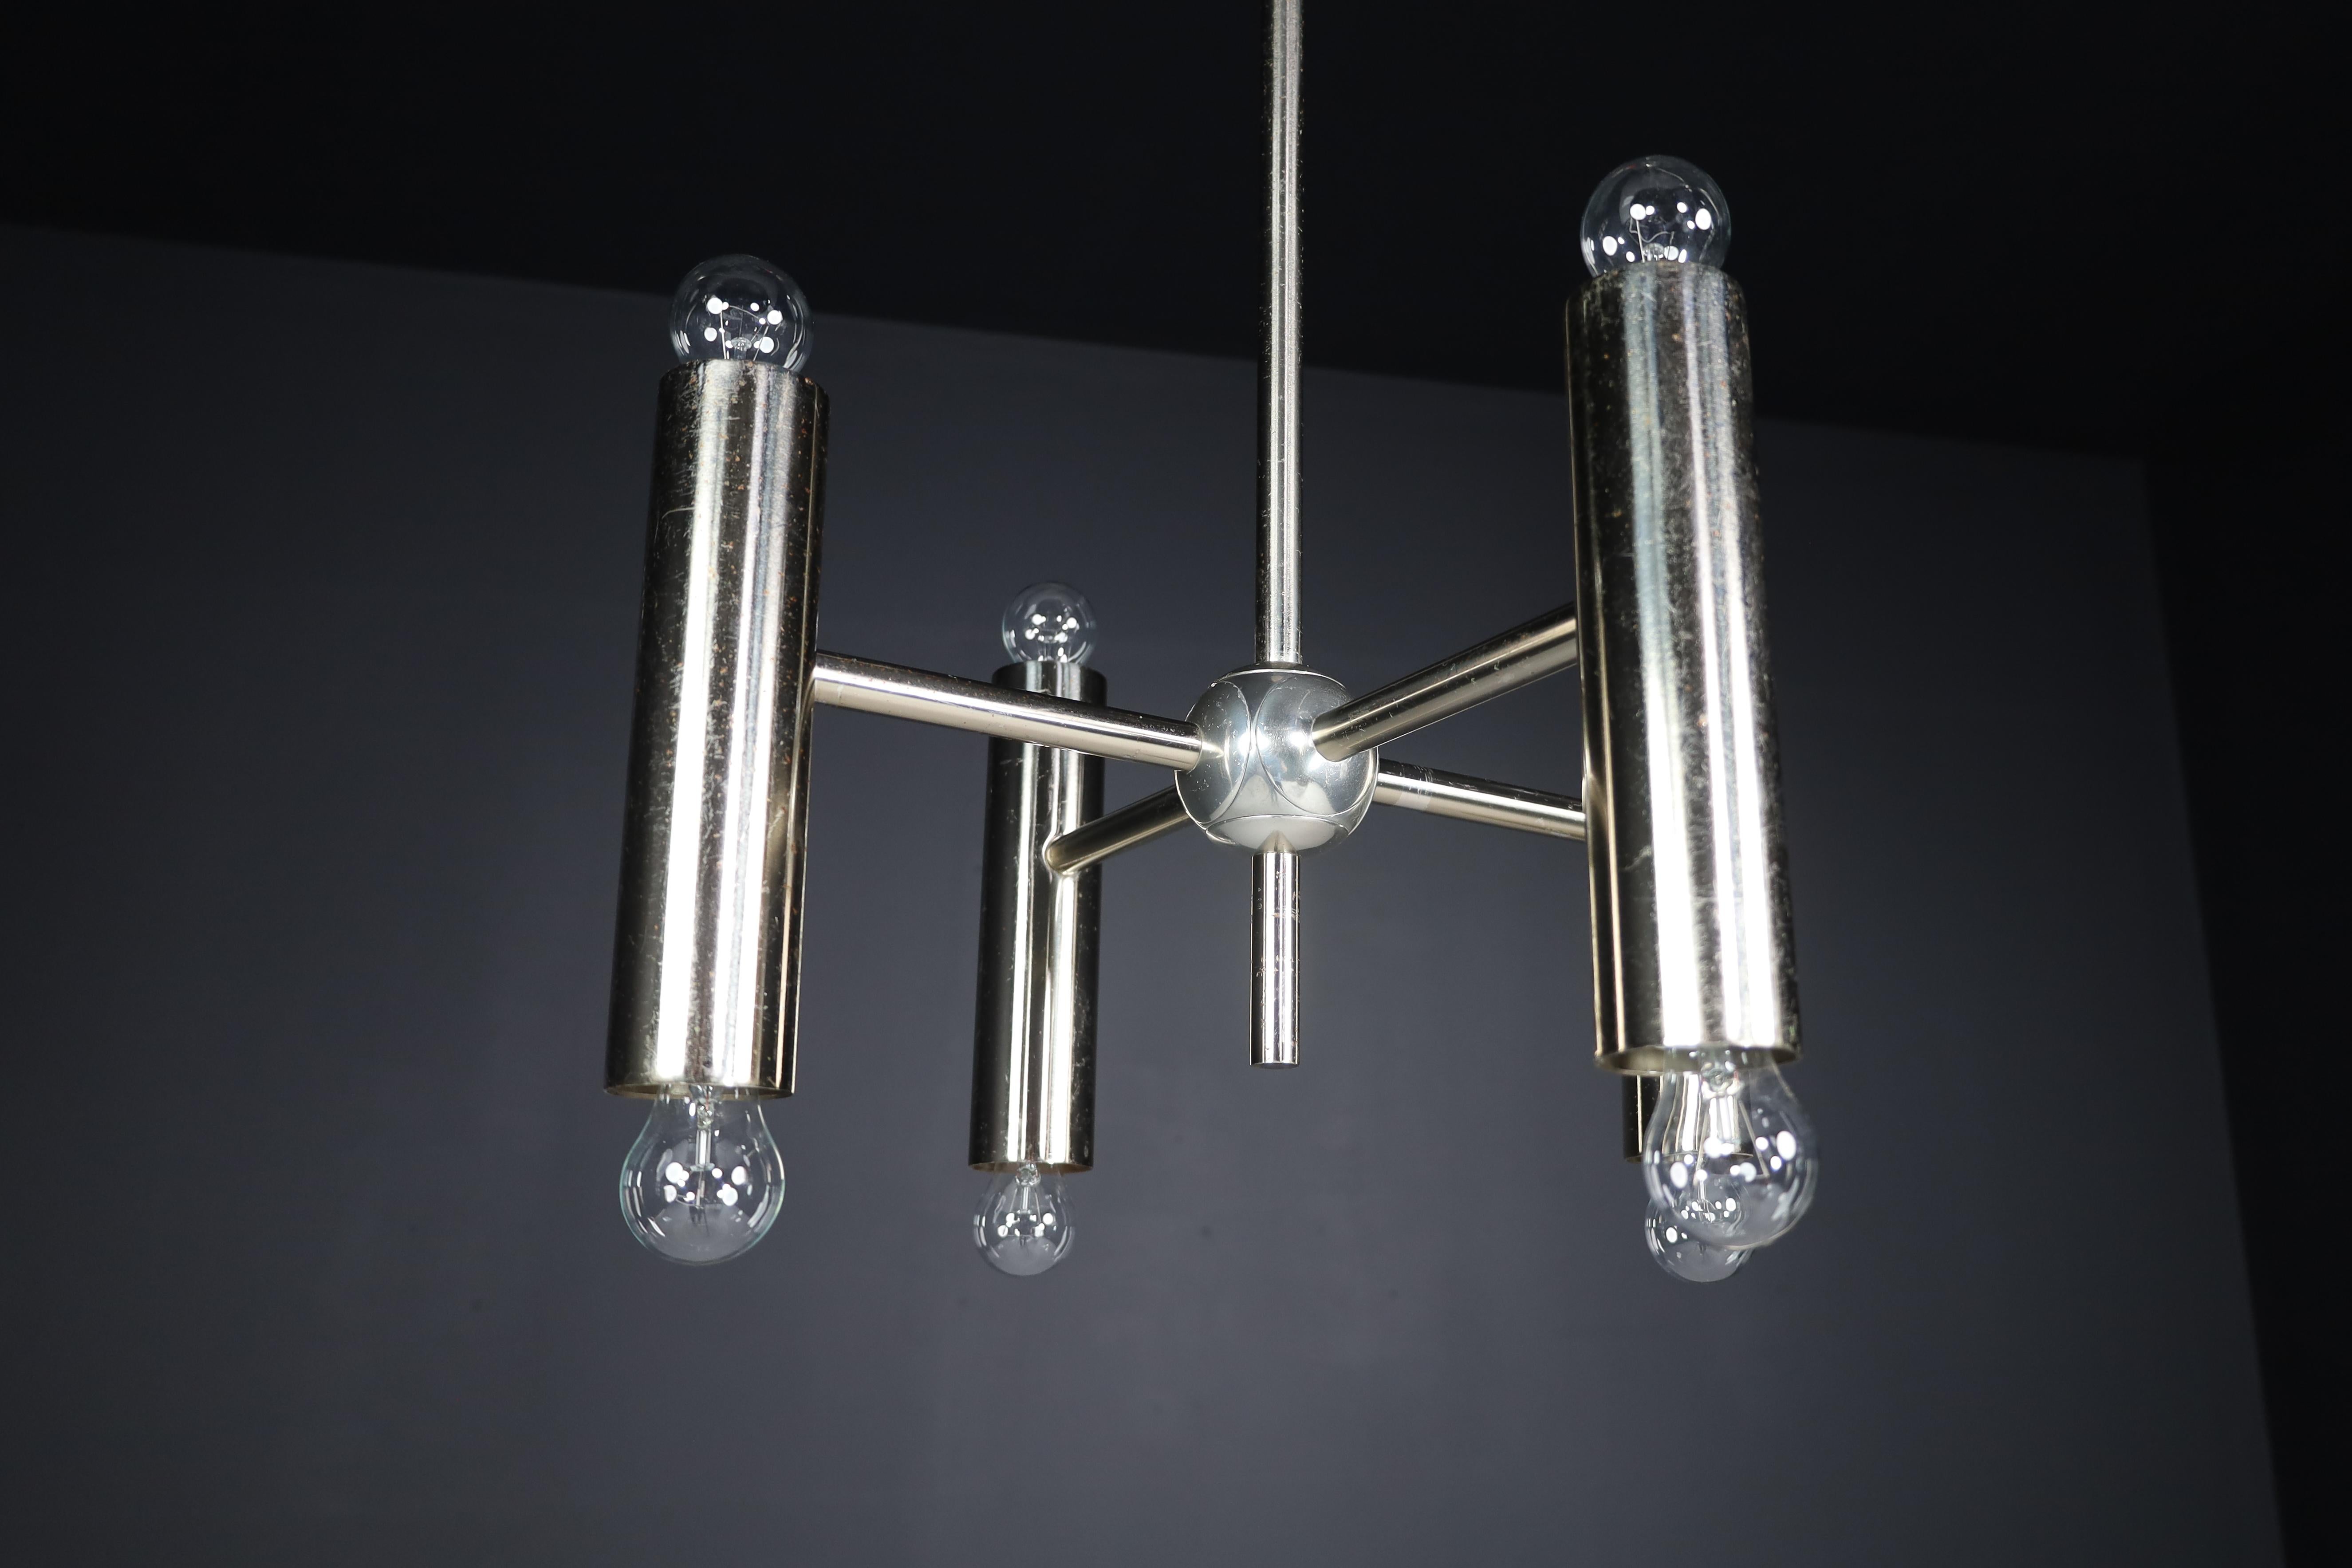 1 of 6 Minimalistic Design Geometric Chandeliers in Chrome, Germany, 1970s For Sale 7